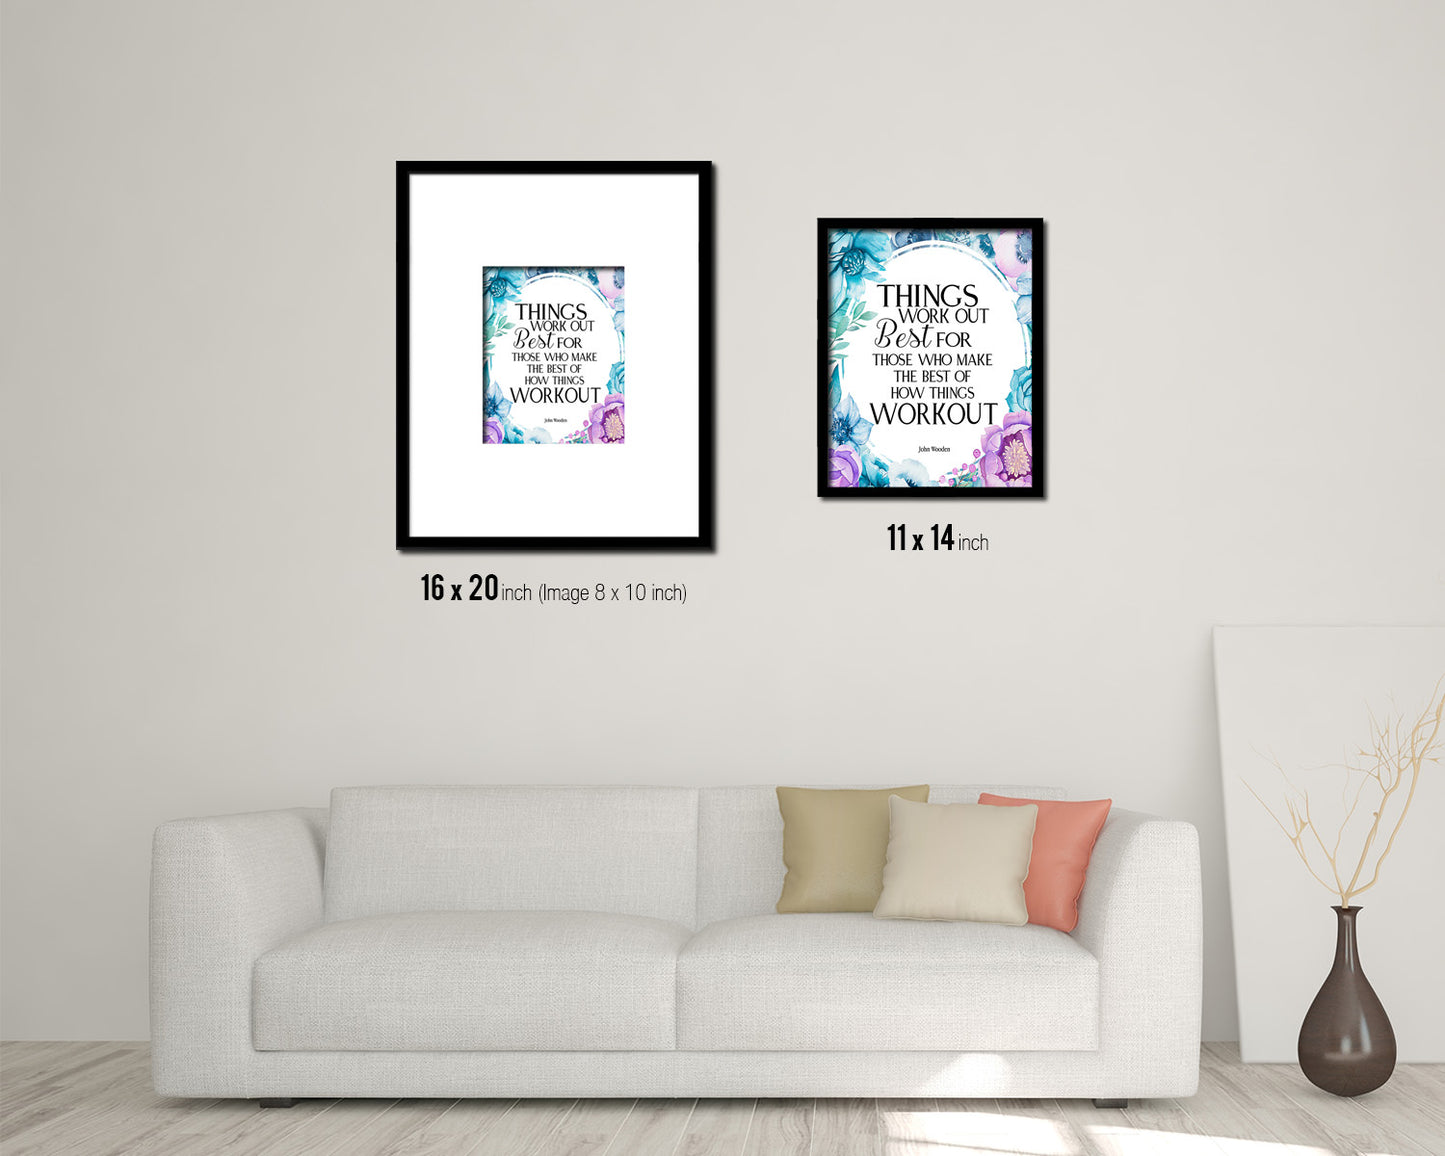 Things work out best Quote Boho Flower Framed Print Wall Decor Art